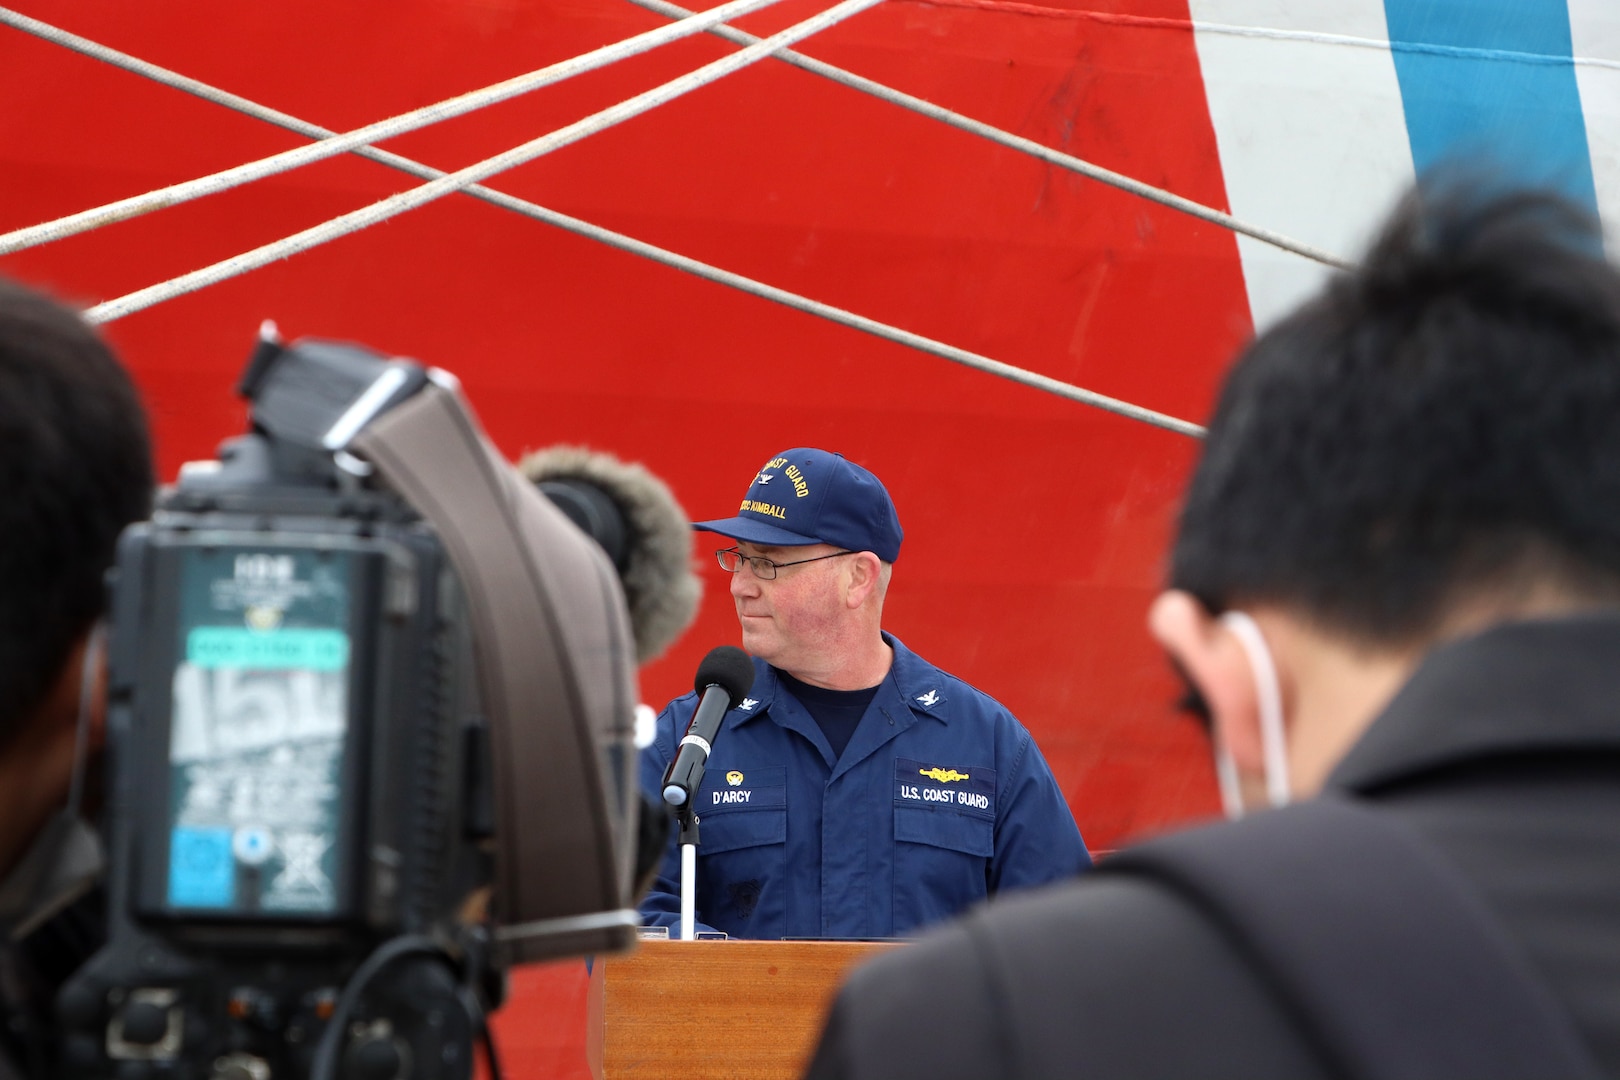 Capt. Thomas D’Arcy, Coast Guard Cutter Kimball’s (WMSL 756) commanding officer, conducts an interview with members of the media during an engagement in Kagoshima, Japan, during the cutter’s Western Pacific patrol, Feb. 10, 2023. Kimball was the first U.S. military ship in recent history to visit Kagoshima, during their patrol where the crew partnered with servicemembers from Japan Coast Guard’s 10th District to plan and conduct combined operations and search-and-rescue exercises. U.S. Coast Guard photo by Ens. Philip Rogers.